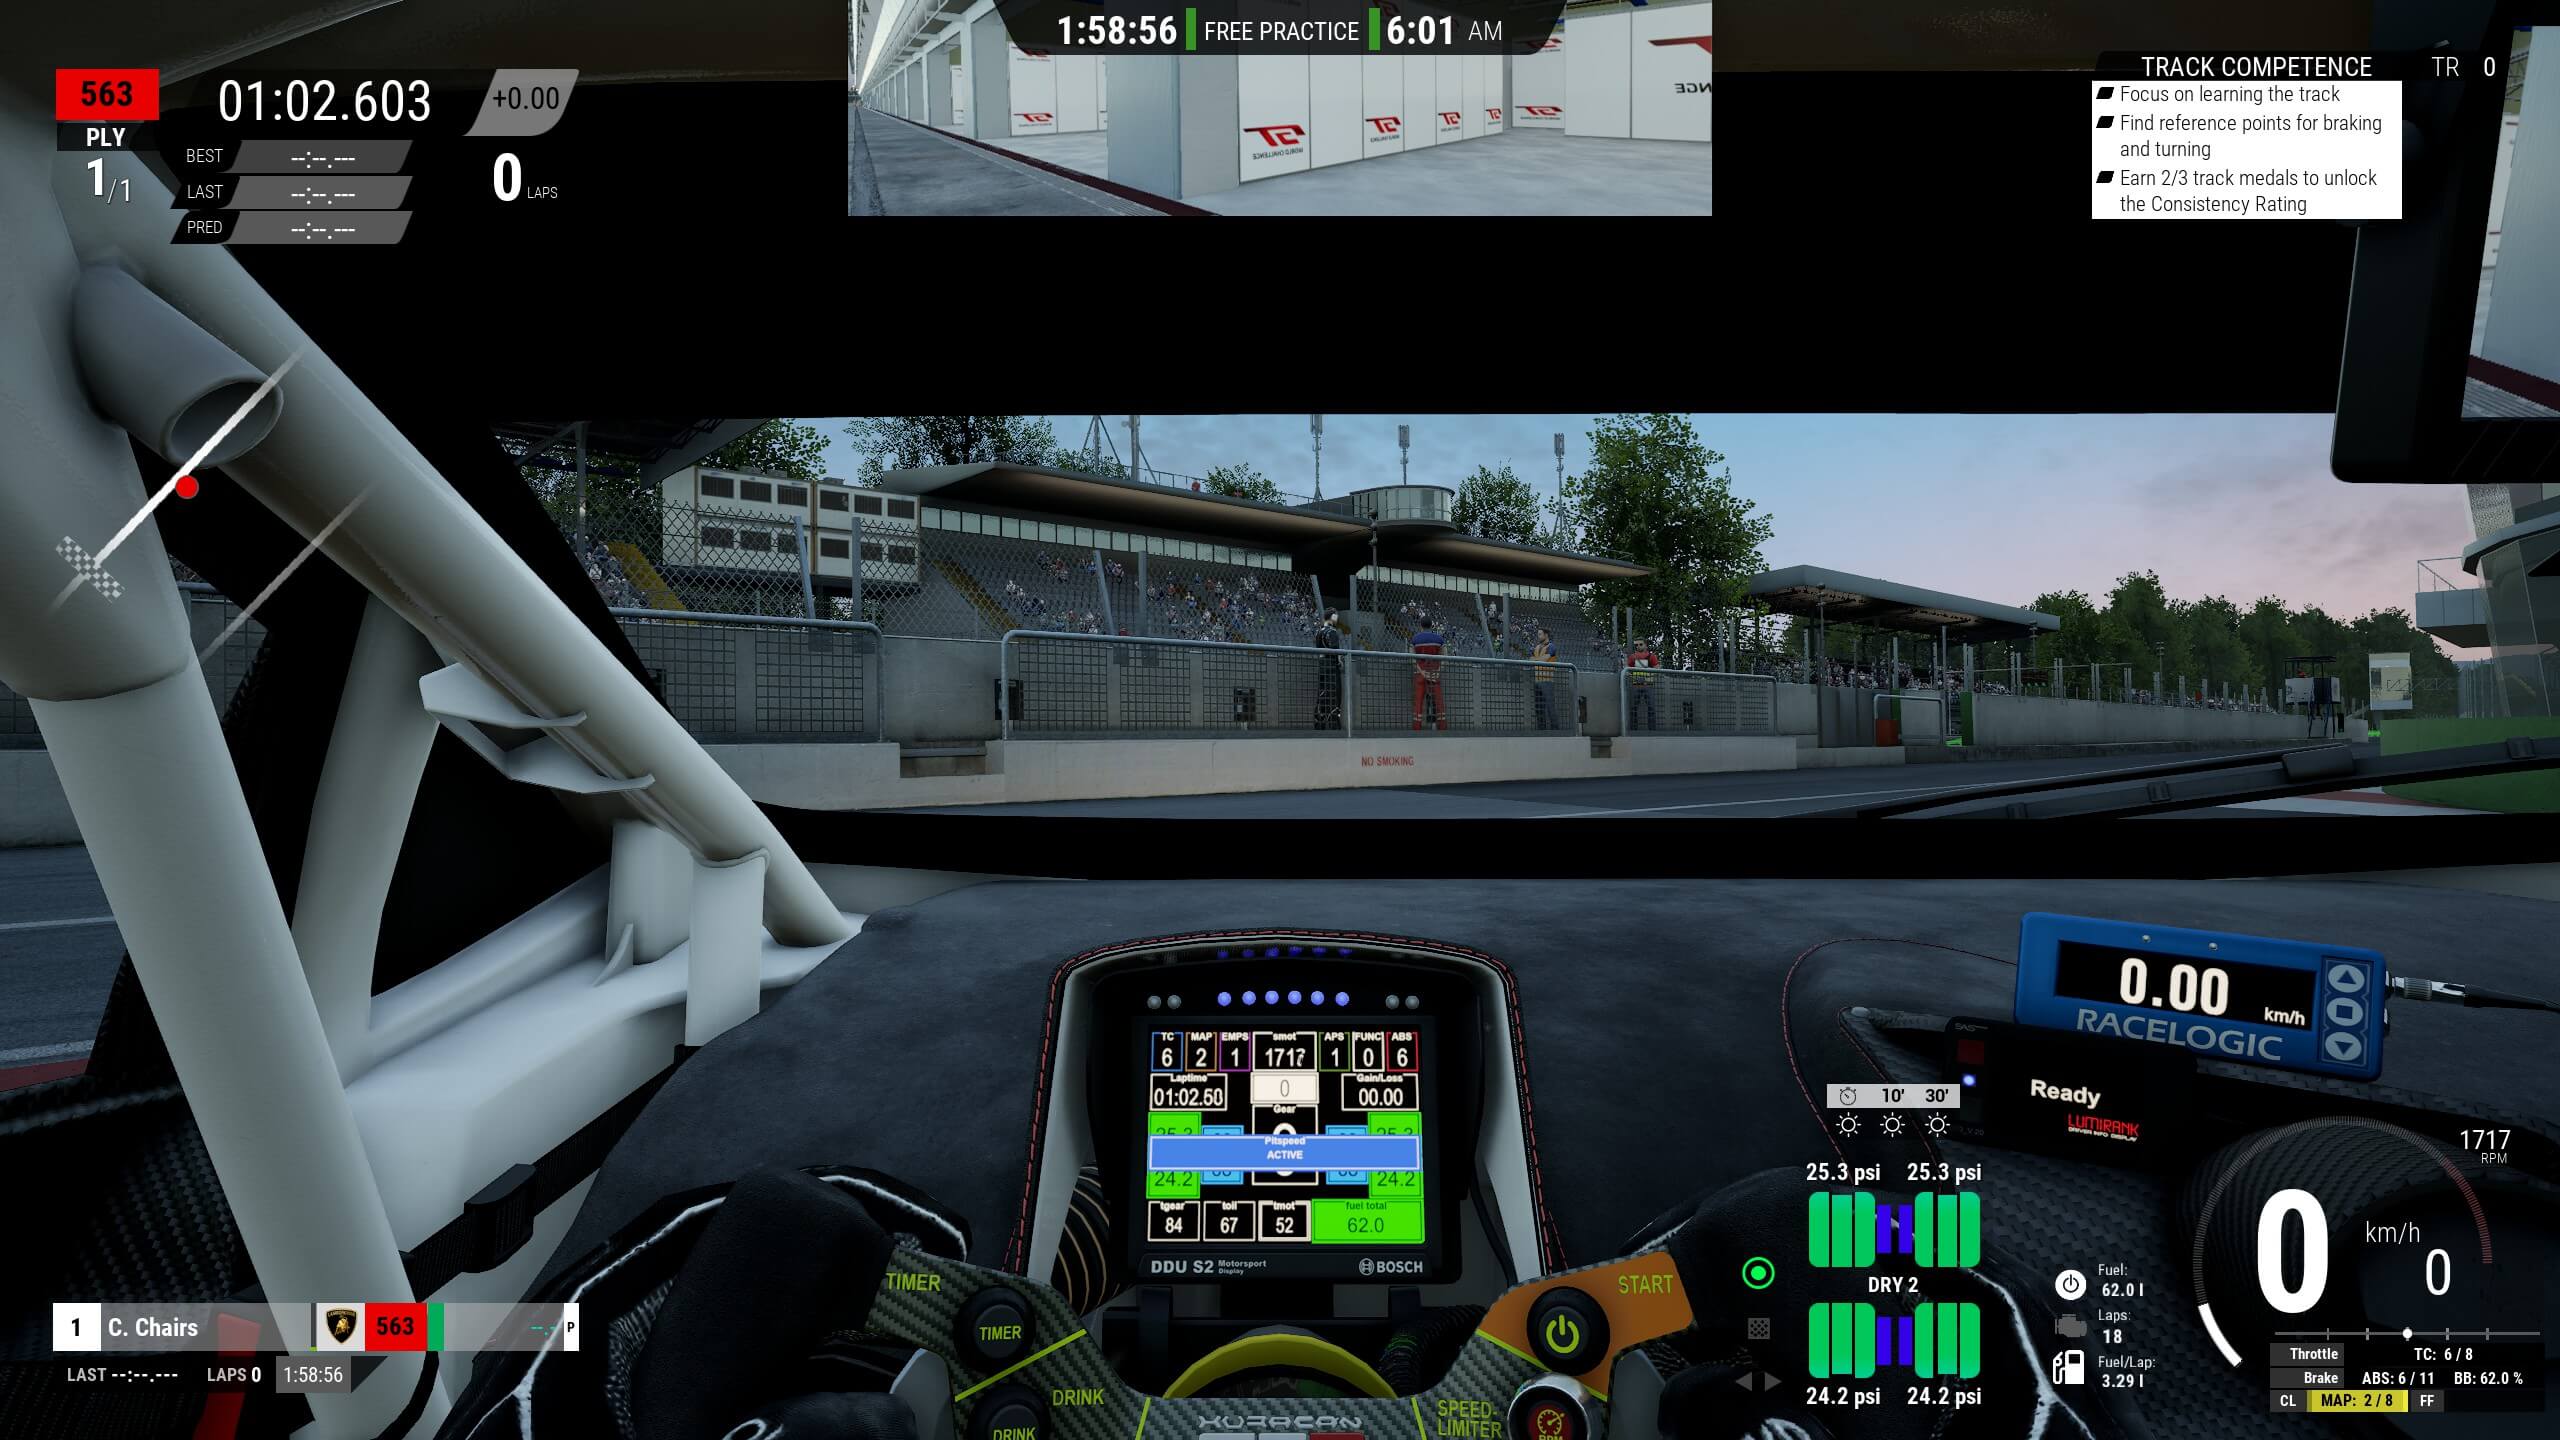 Screenshot from Assetto Corsa Competizione: Cockpit view in free practice mode